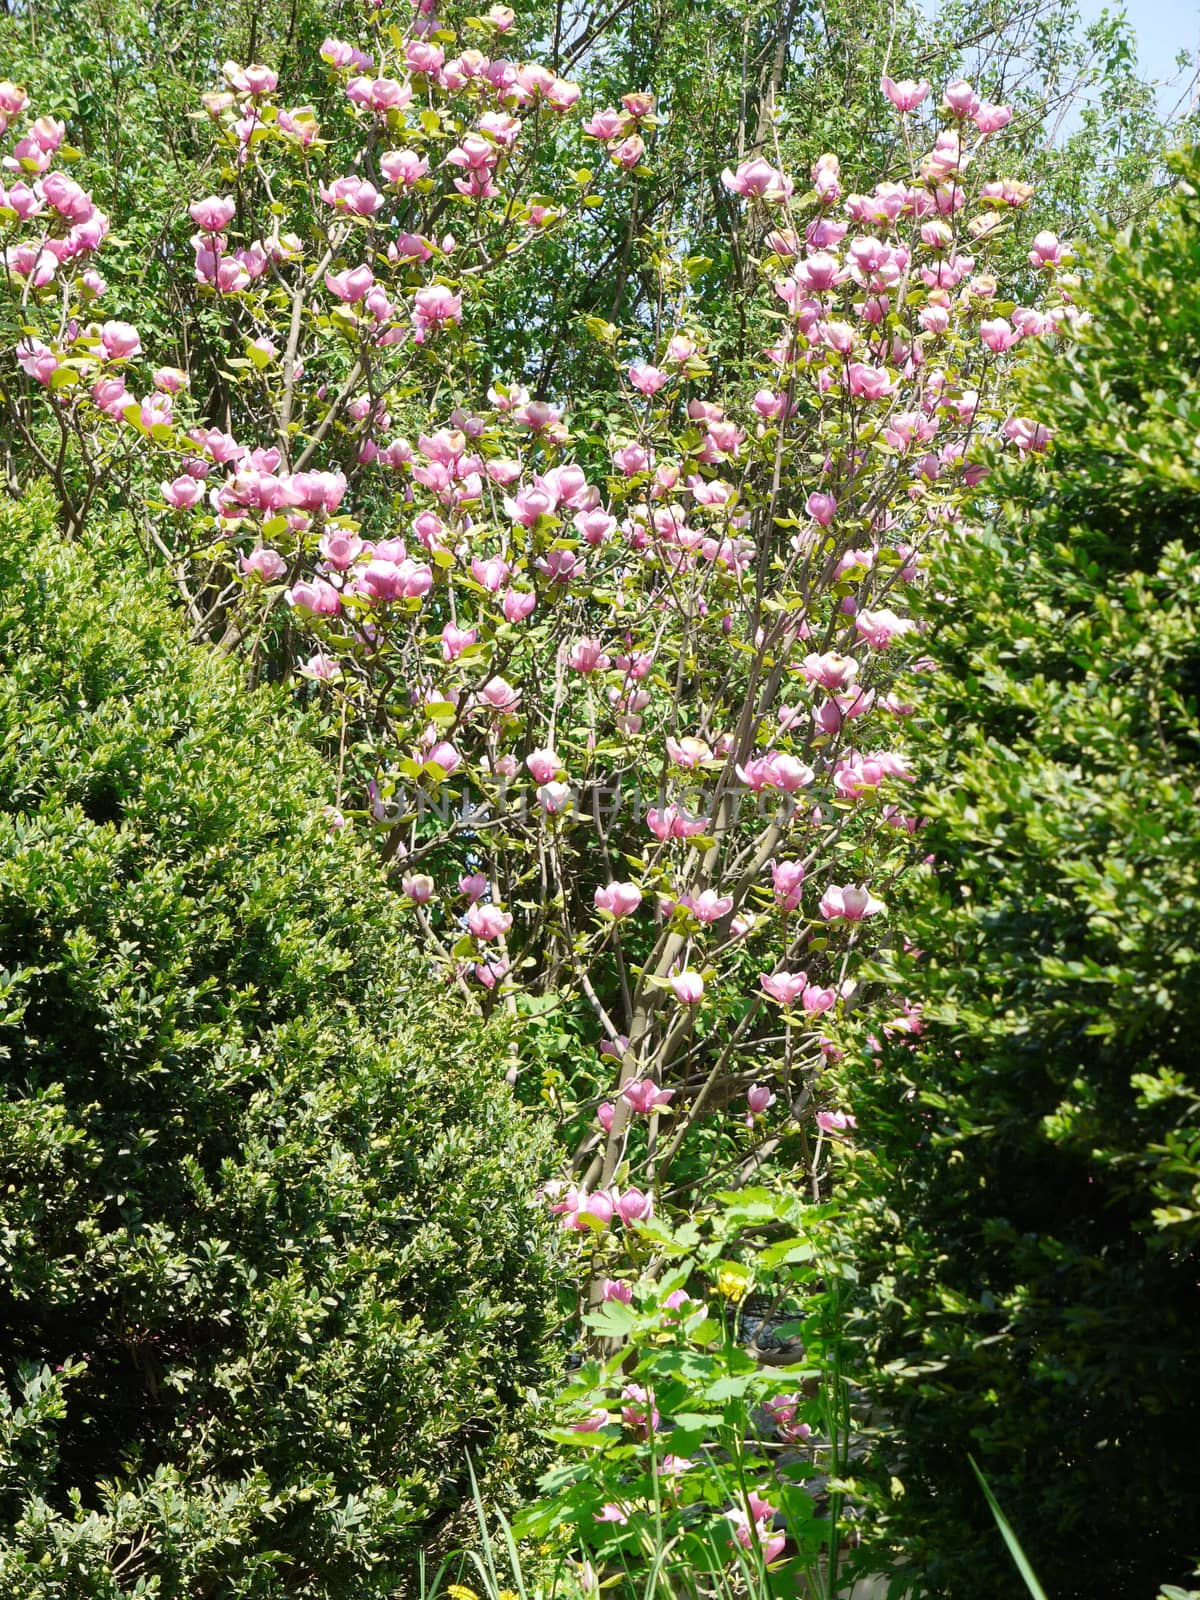 The magnificent flower of the pink magnolia is visible among the bushes of evergreen boxwood